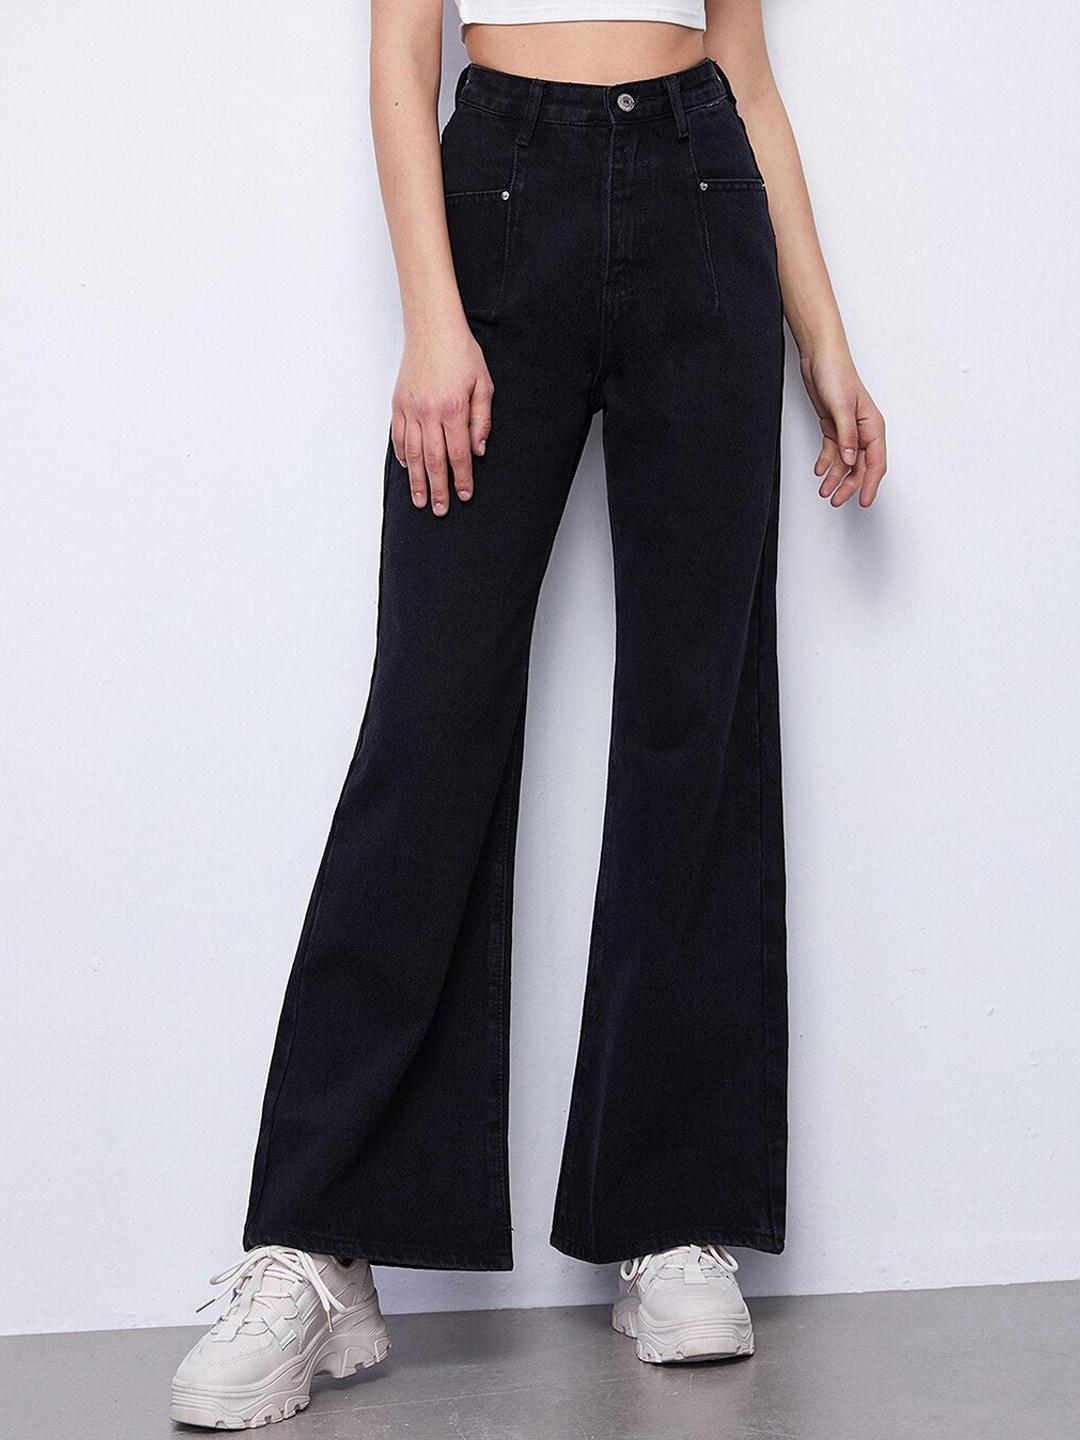 kotty-women-black-jean-flared-high-rise-low-distress-stretchable-jeans